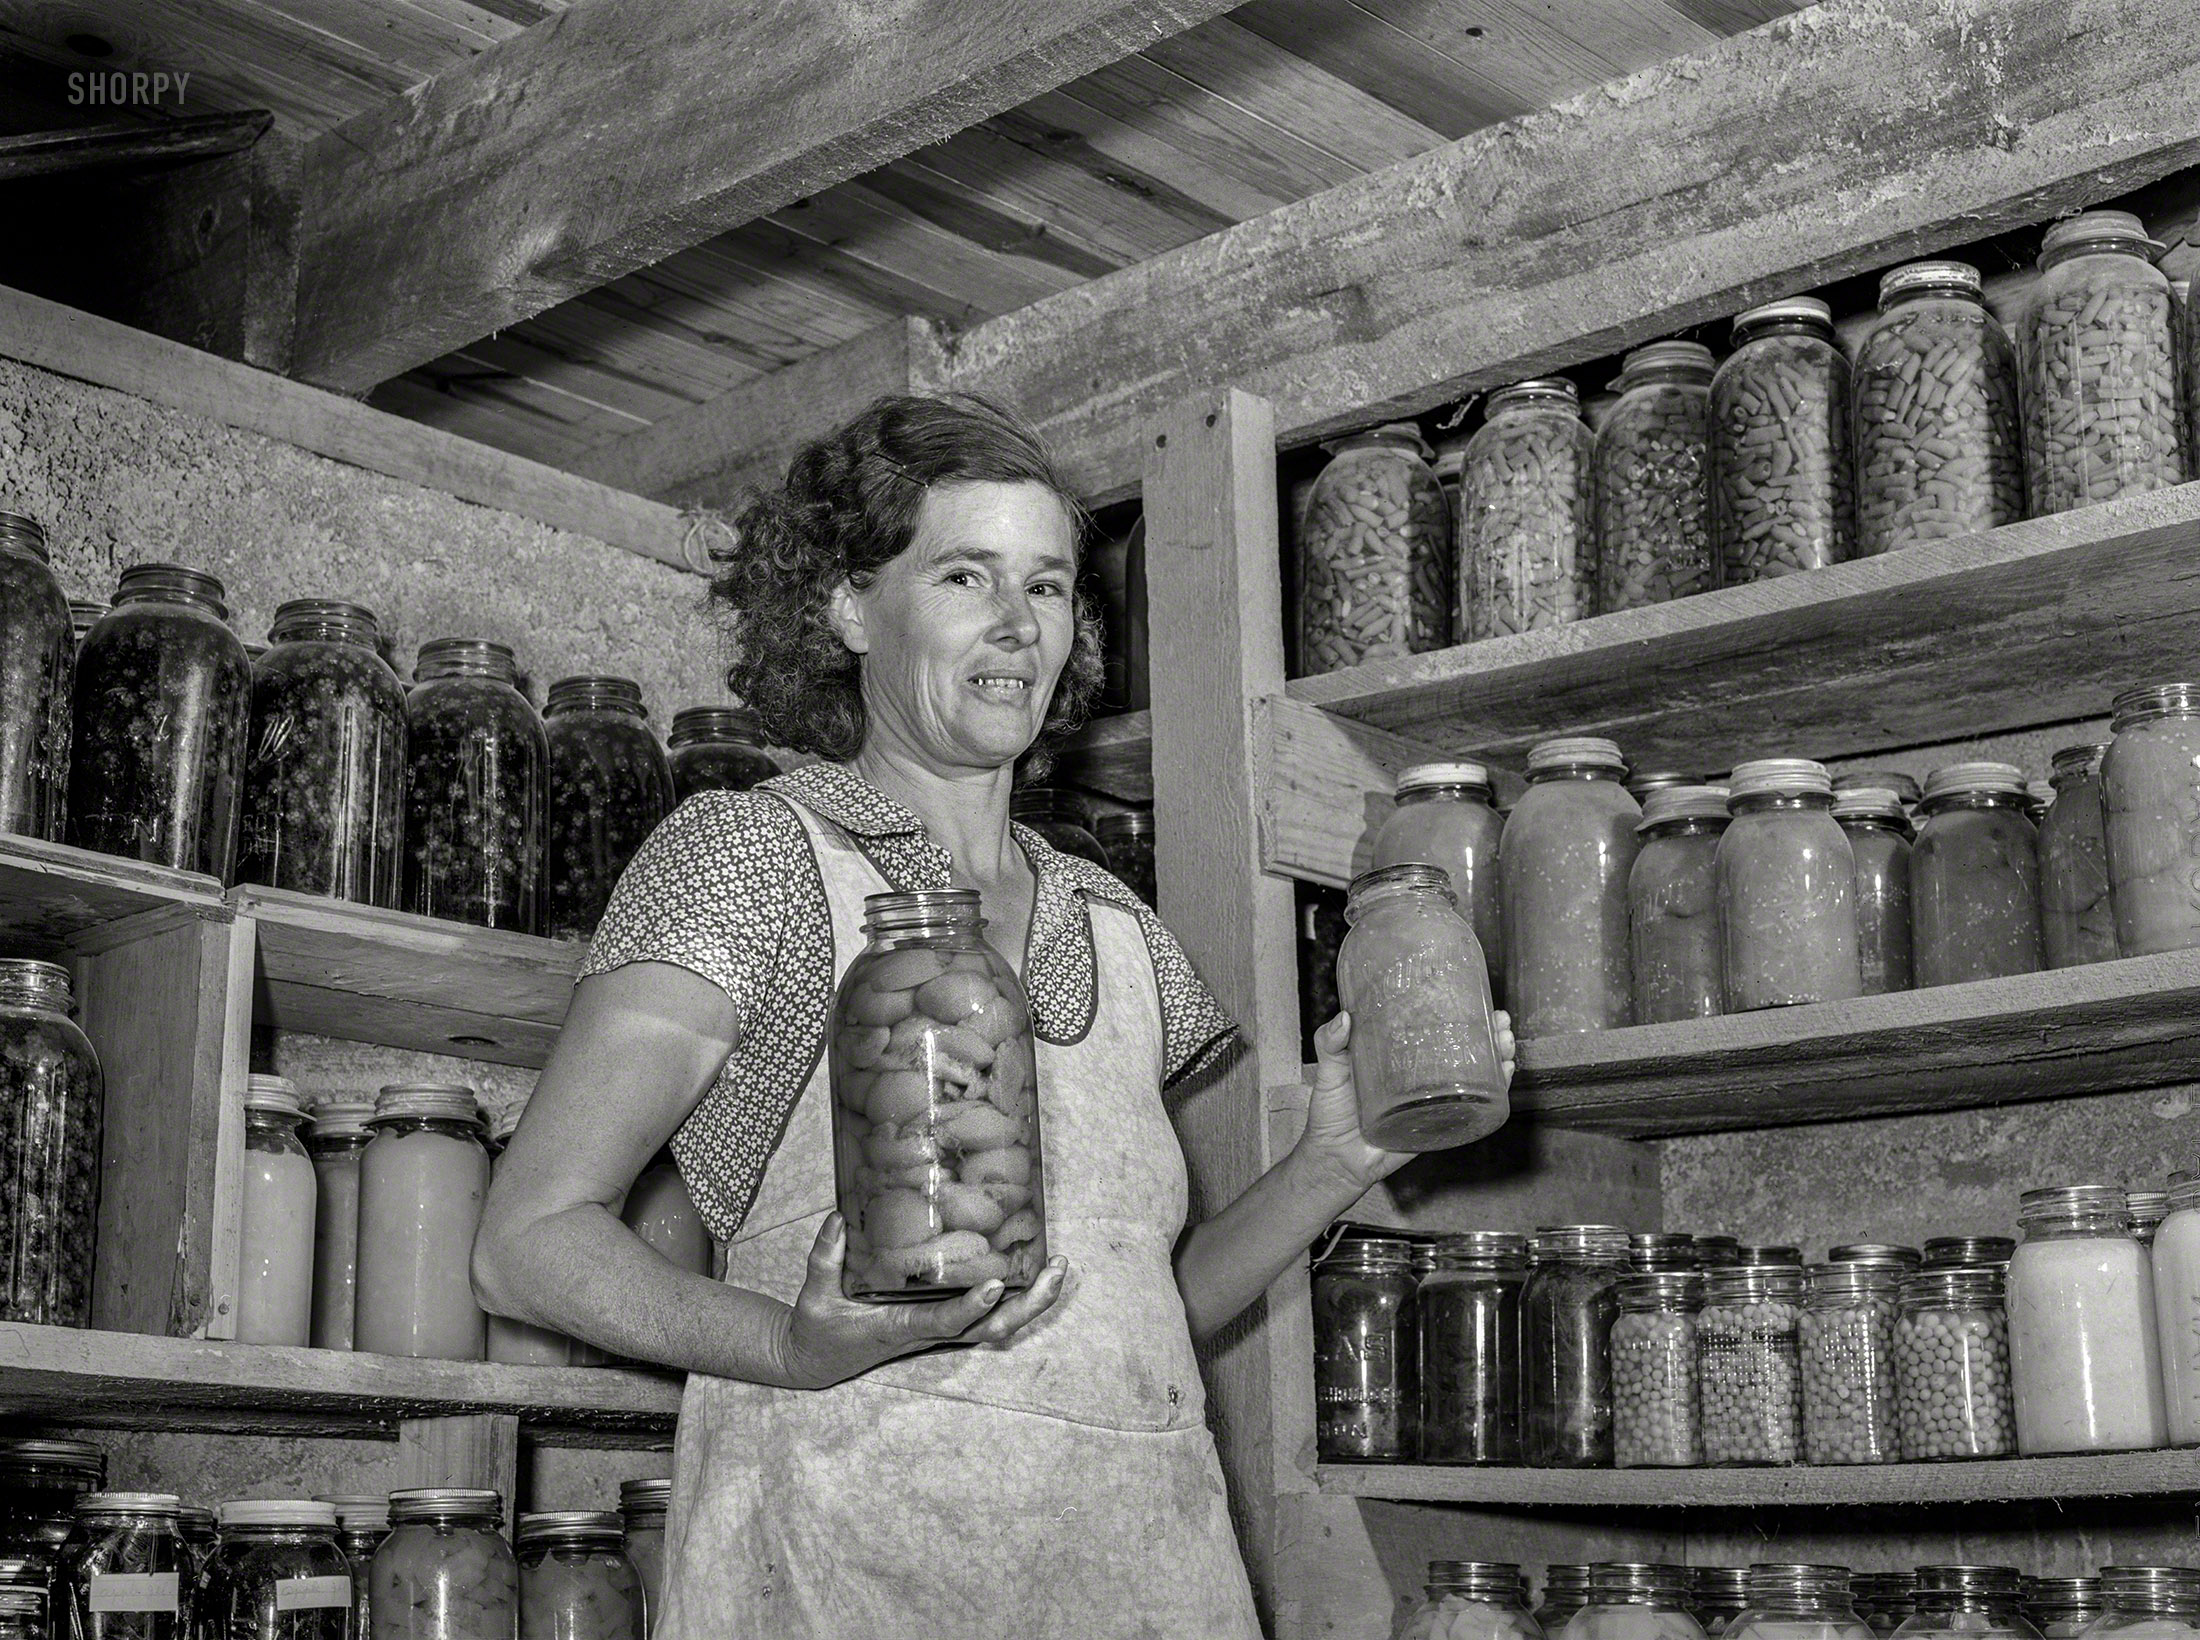 November 1939. "Mrs. Lawrence Corda, wife of tiff miner, with some of her 800 quarts of food canned under FSA supervision. Washington County, Missouri." Photo by Arthur Rothstein for the Farm Security Administration. View full size.